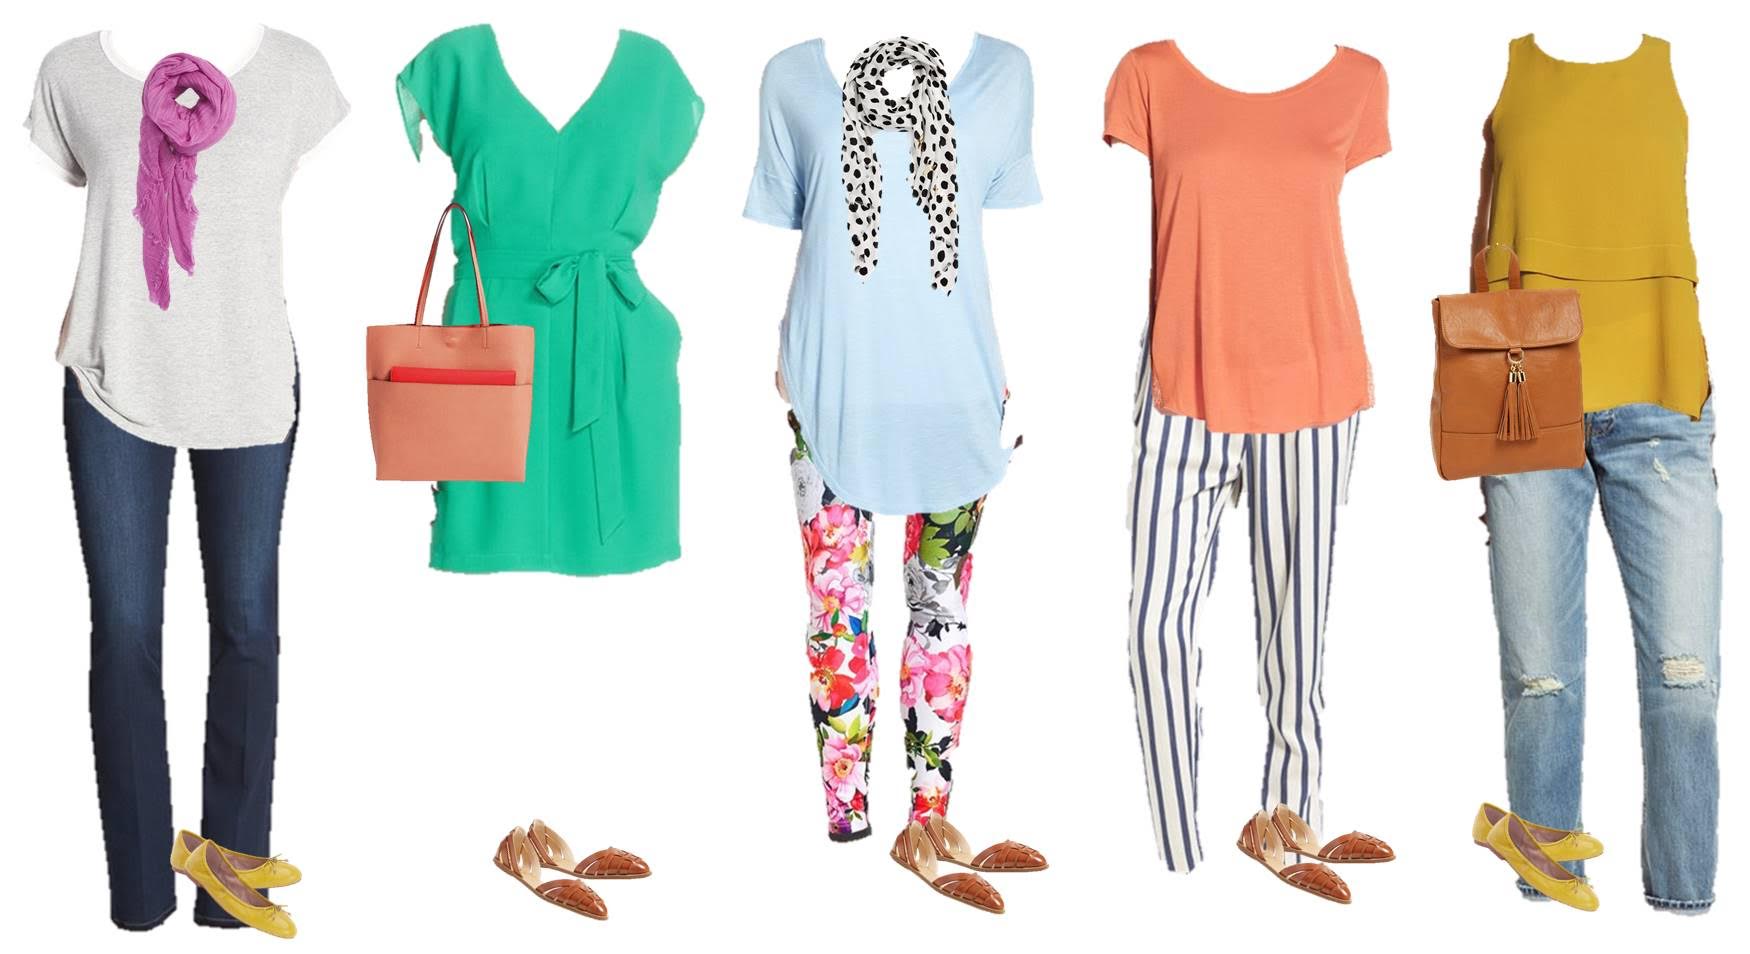 Fabulous Mix & Match Spring Styles from Nordstrom 2